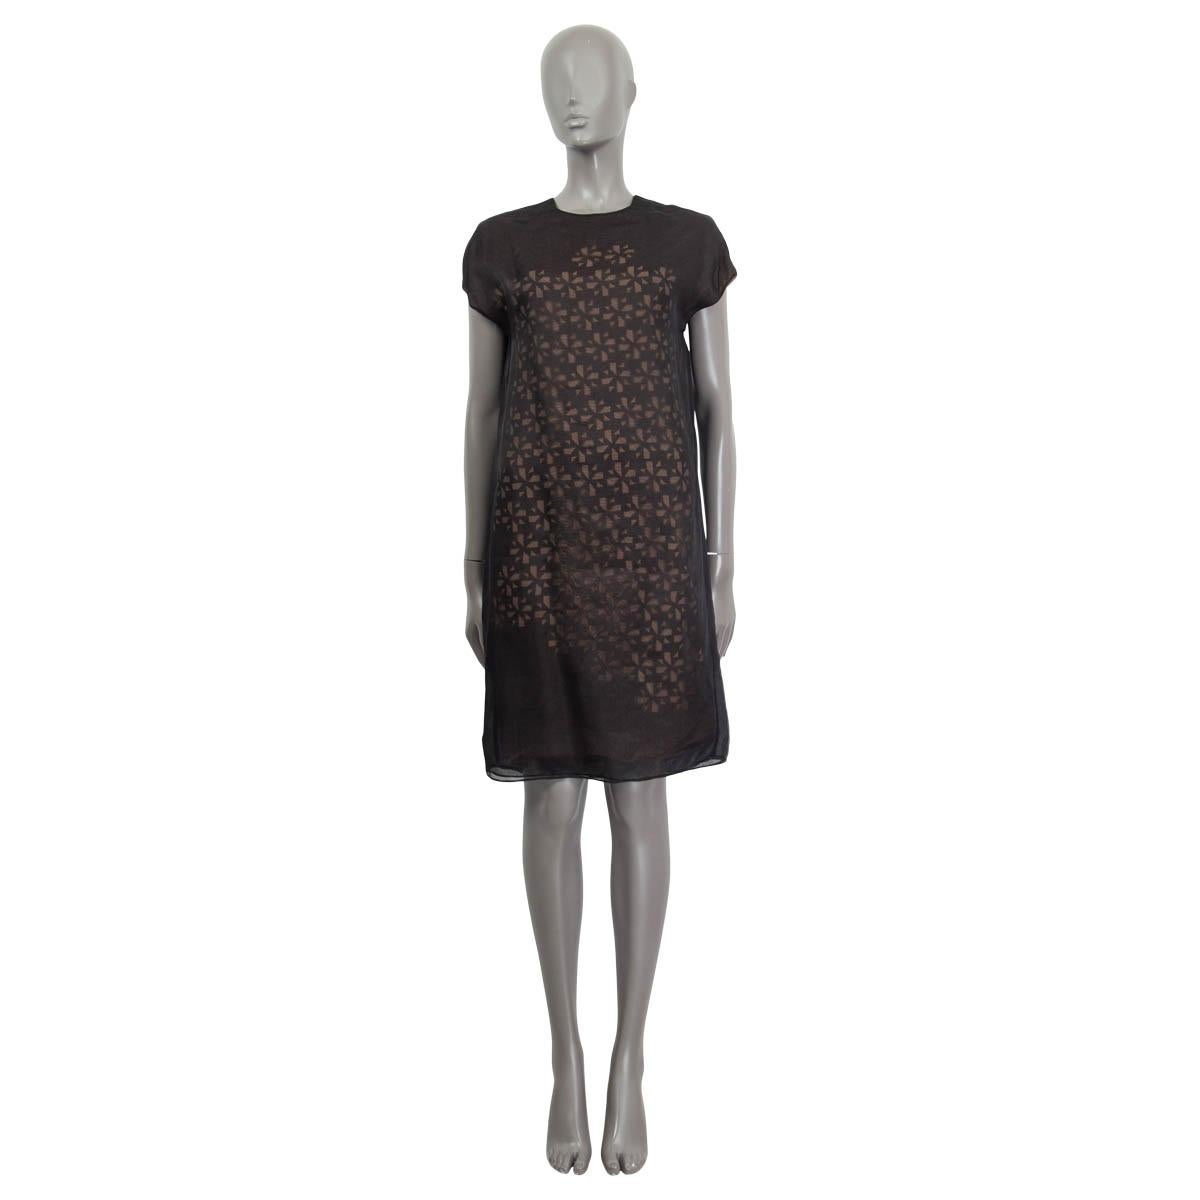 100% authentic Fendi cap sleeve shift dress in black silk (100%) with floral cut-outs on the front. Opens with a button on the back. Lined in nude silk (100%). Has been worn and is in excellent condition.

Measurements
Tag Size	38
Size	XS
Bust	94cm